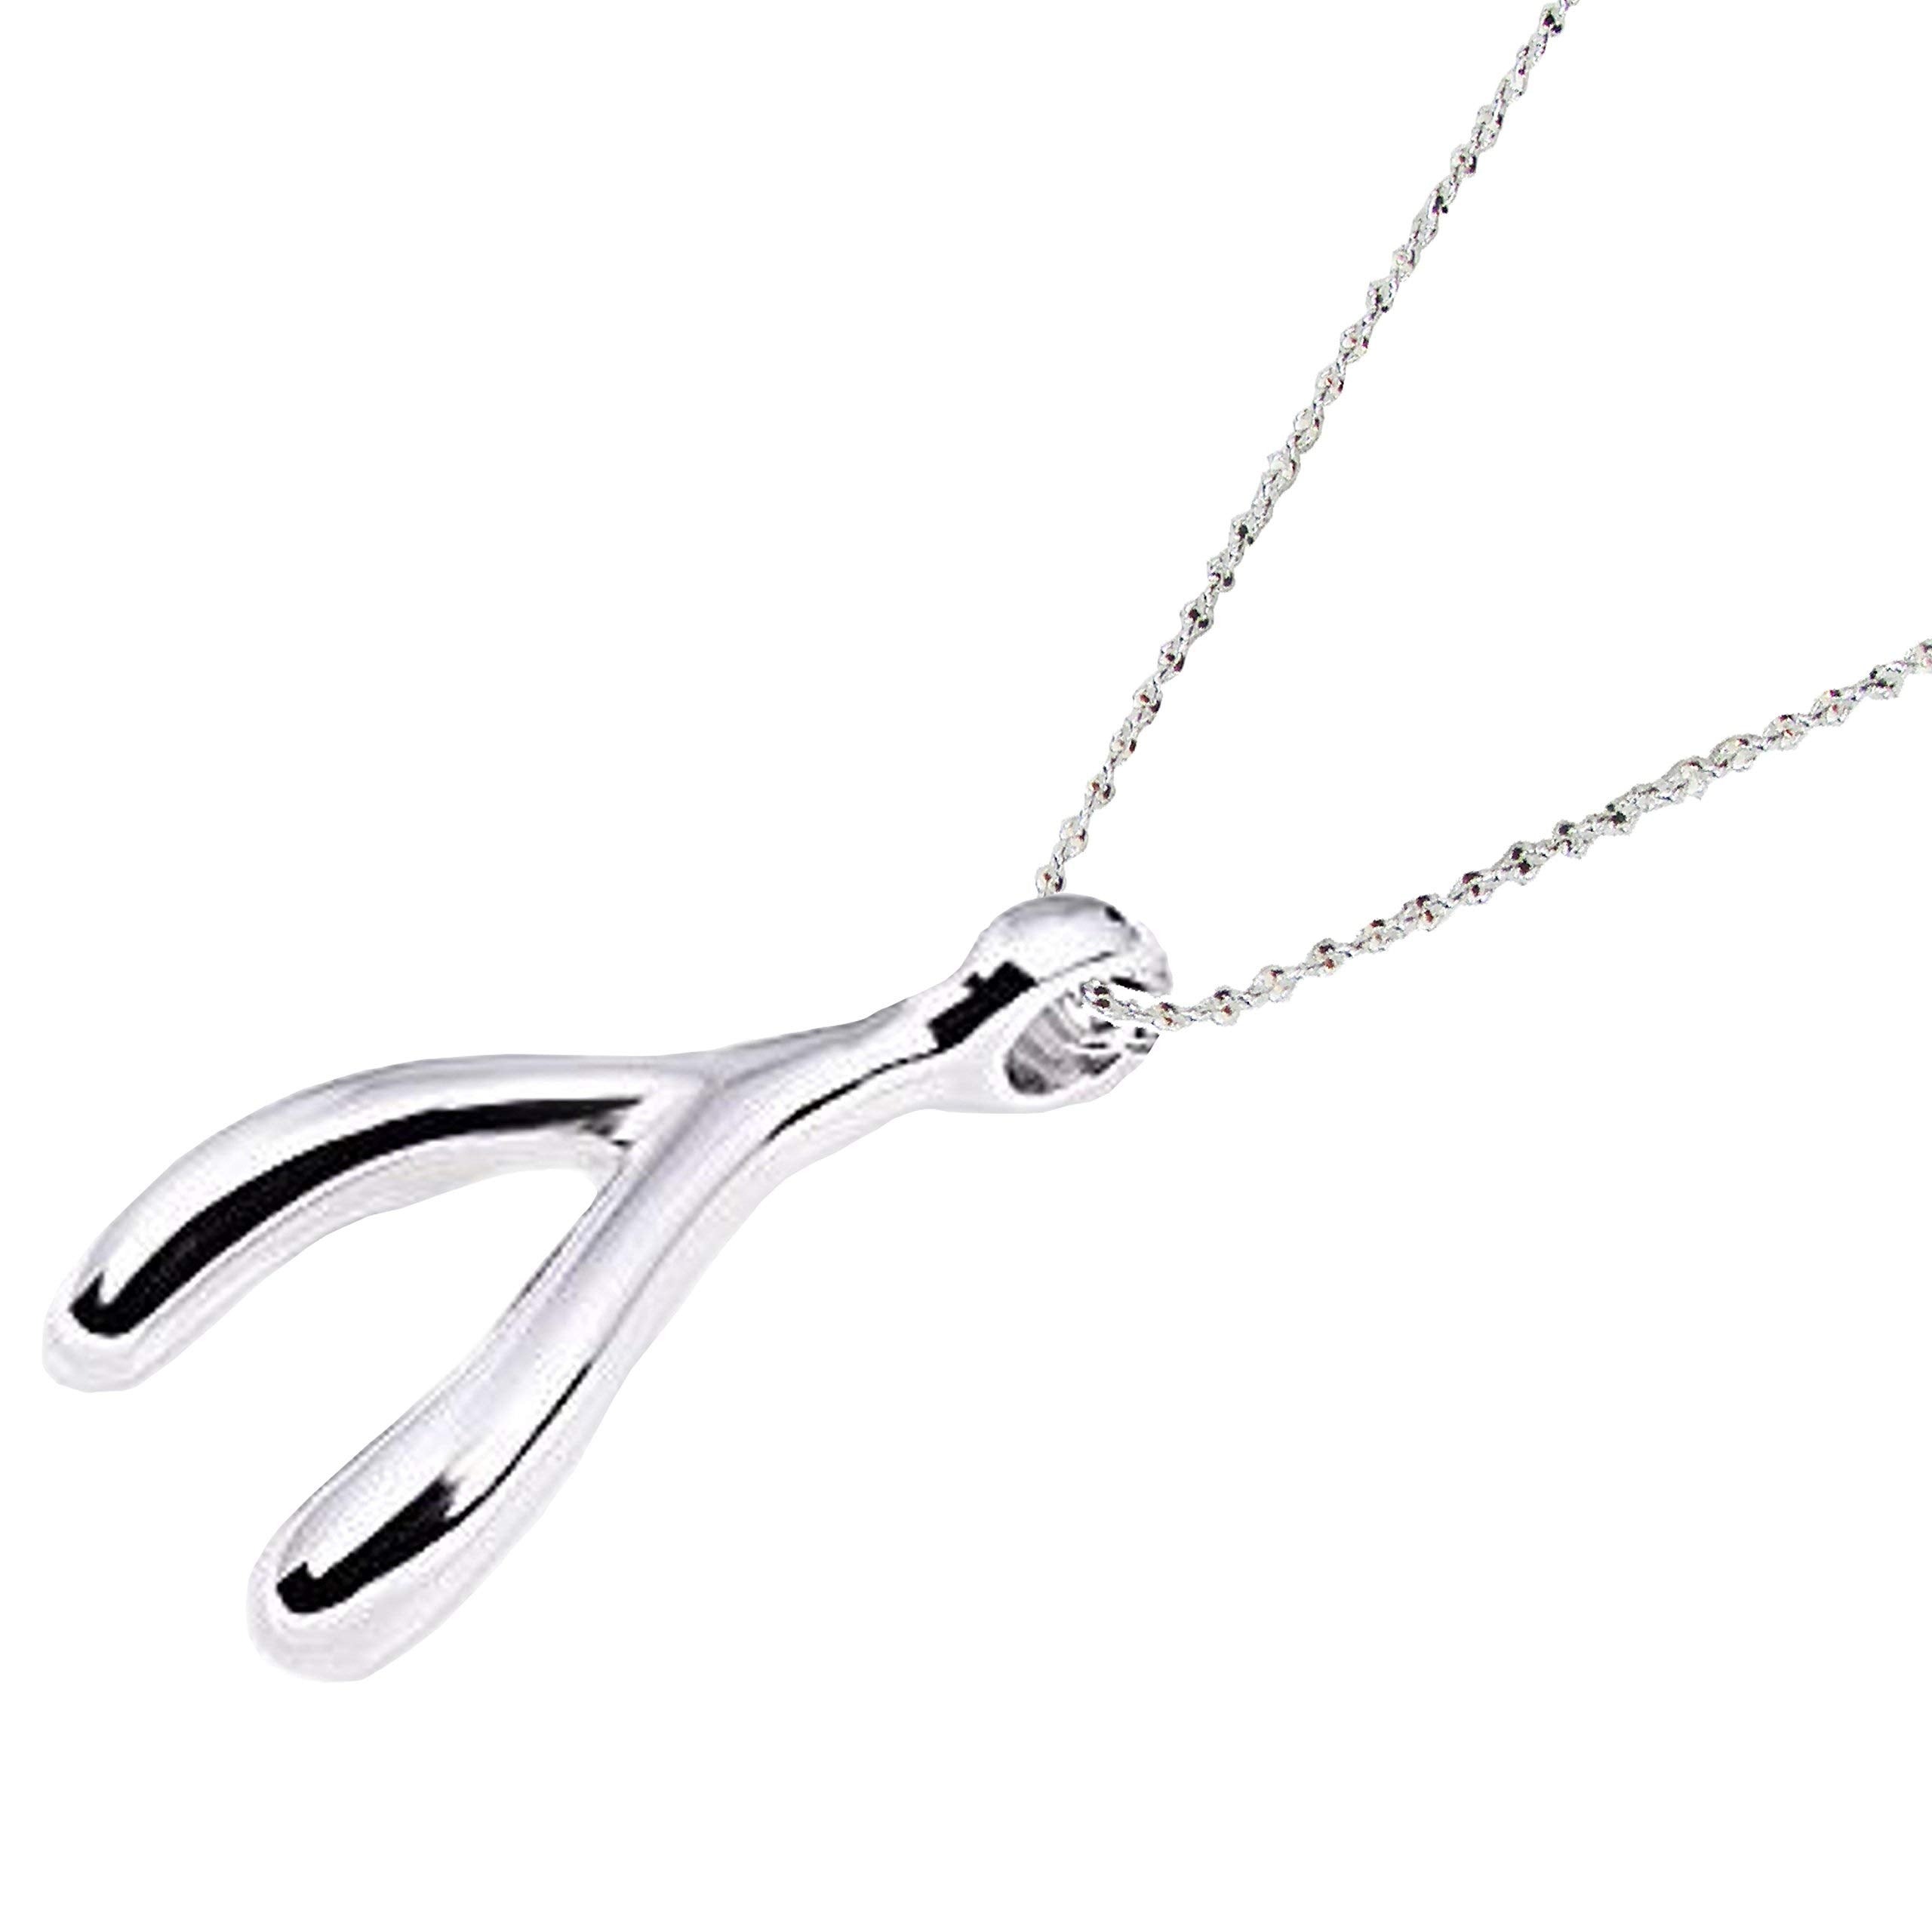 Silver Wishbone Lucky Charm Pendant Necklace